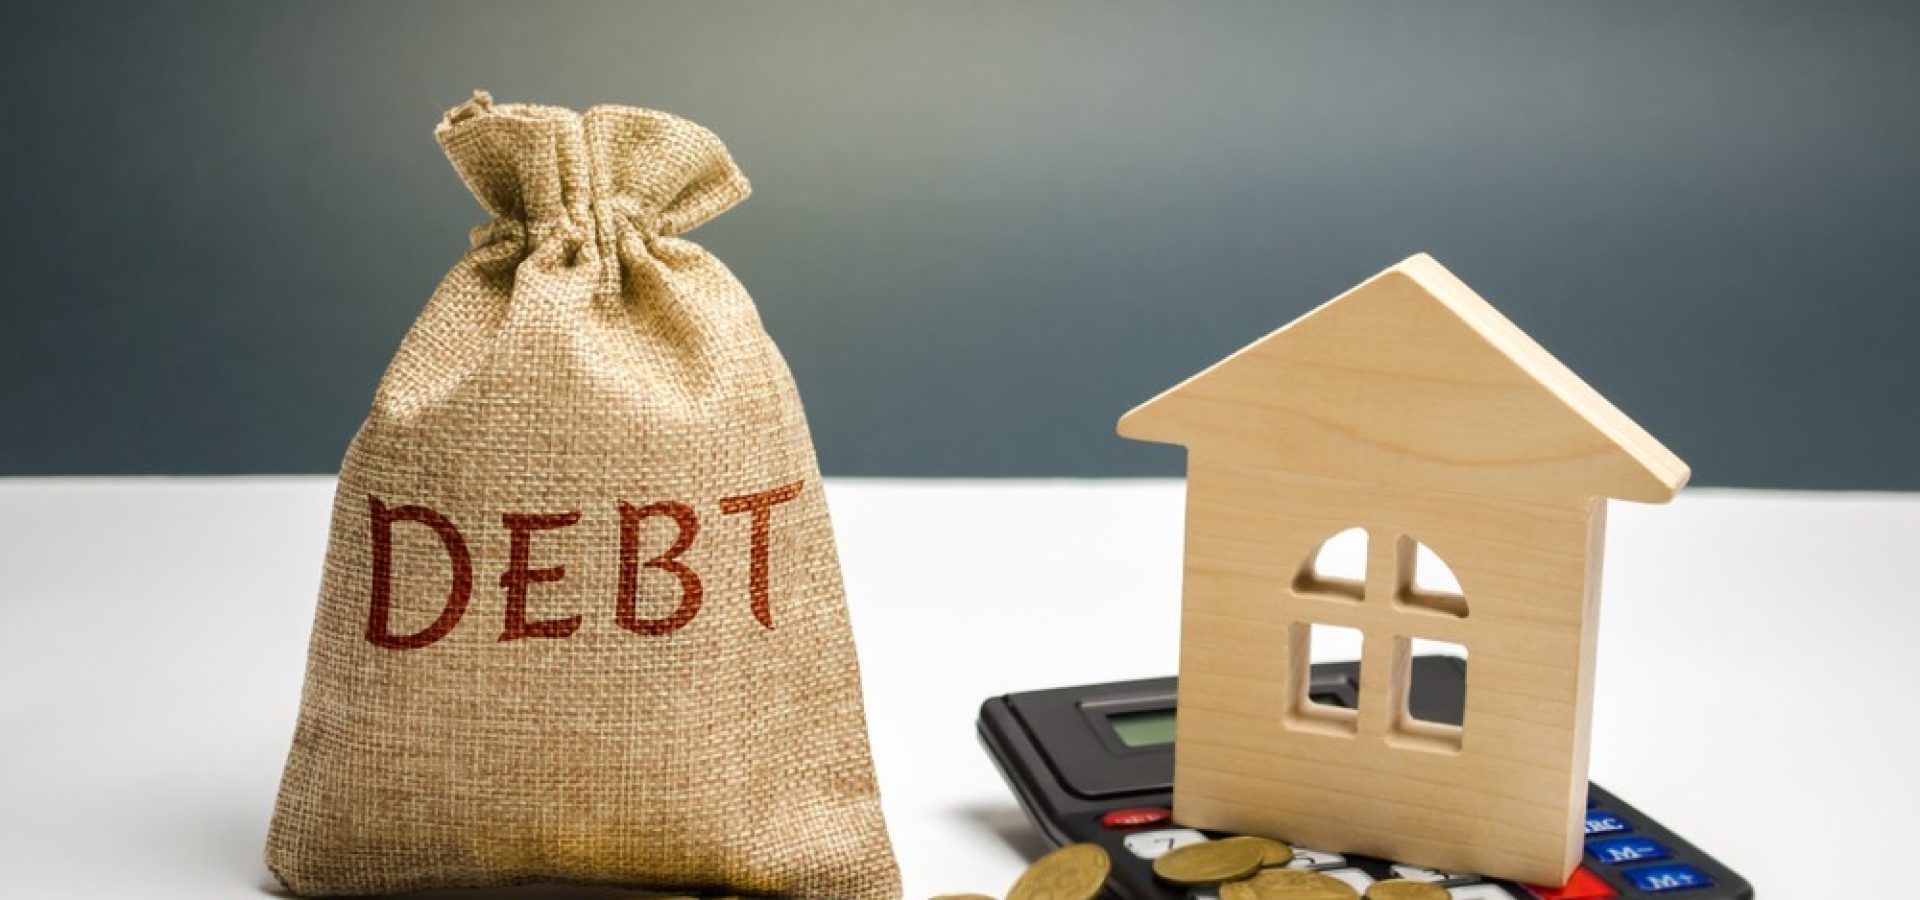 Household Debt Surpassed $15 Trillion for the First Time